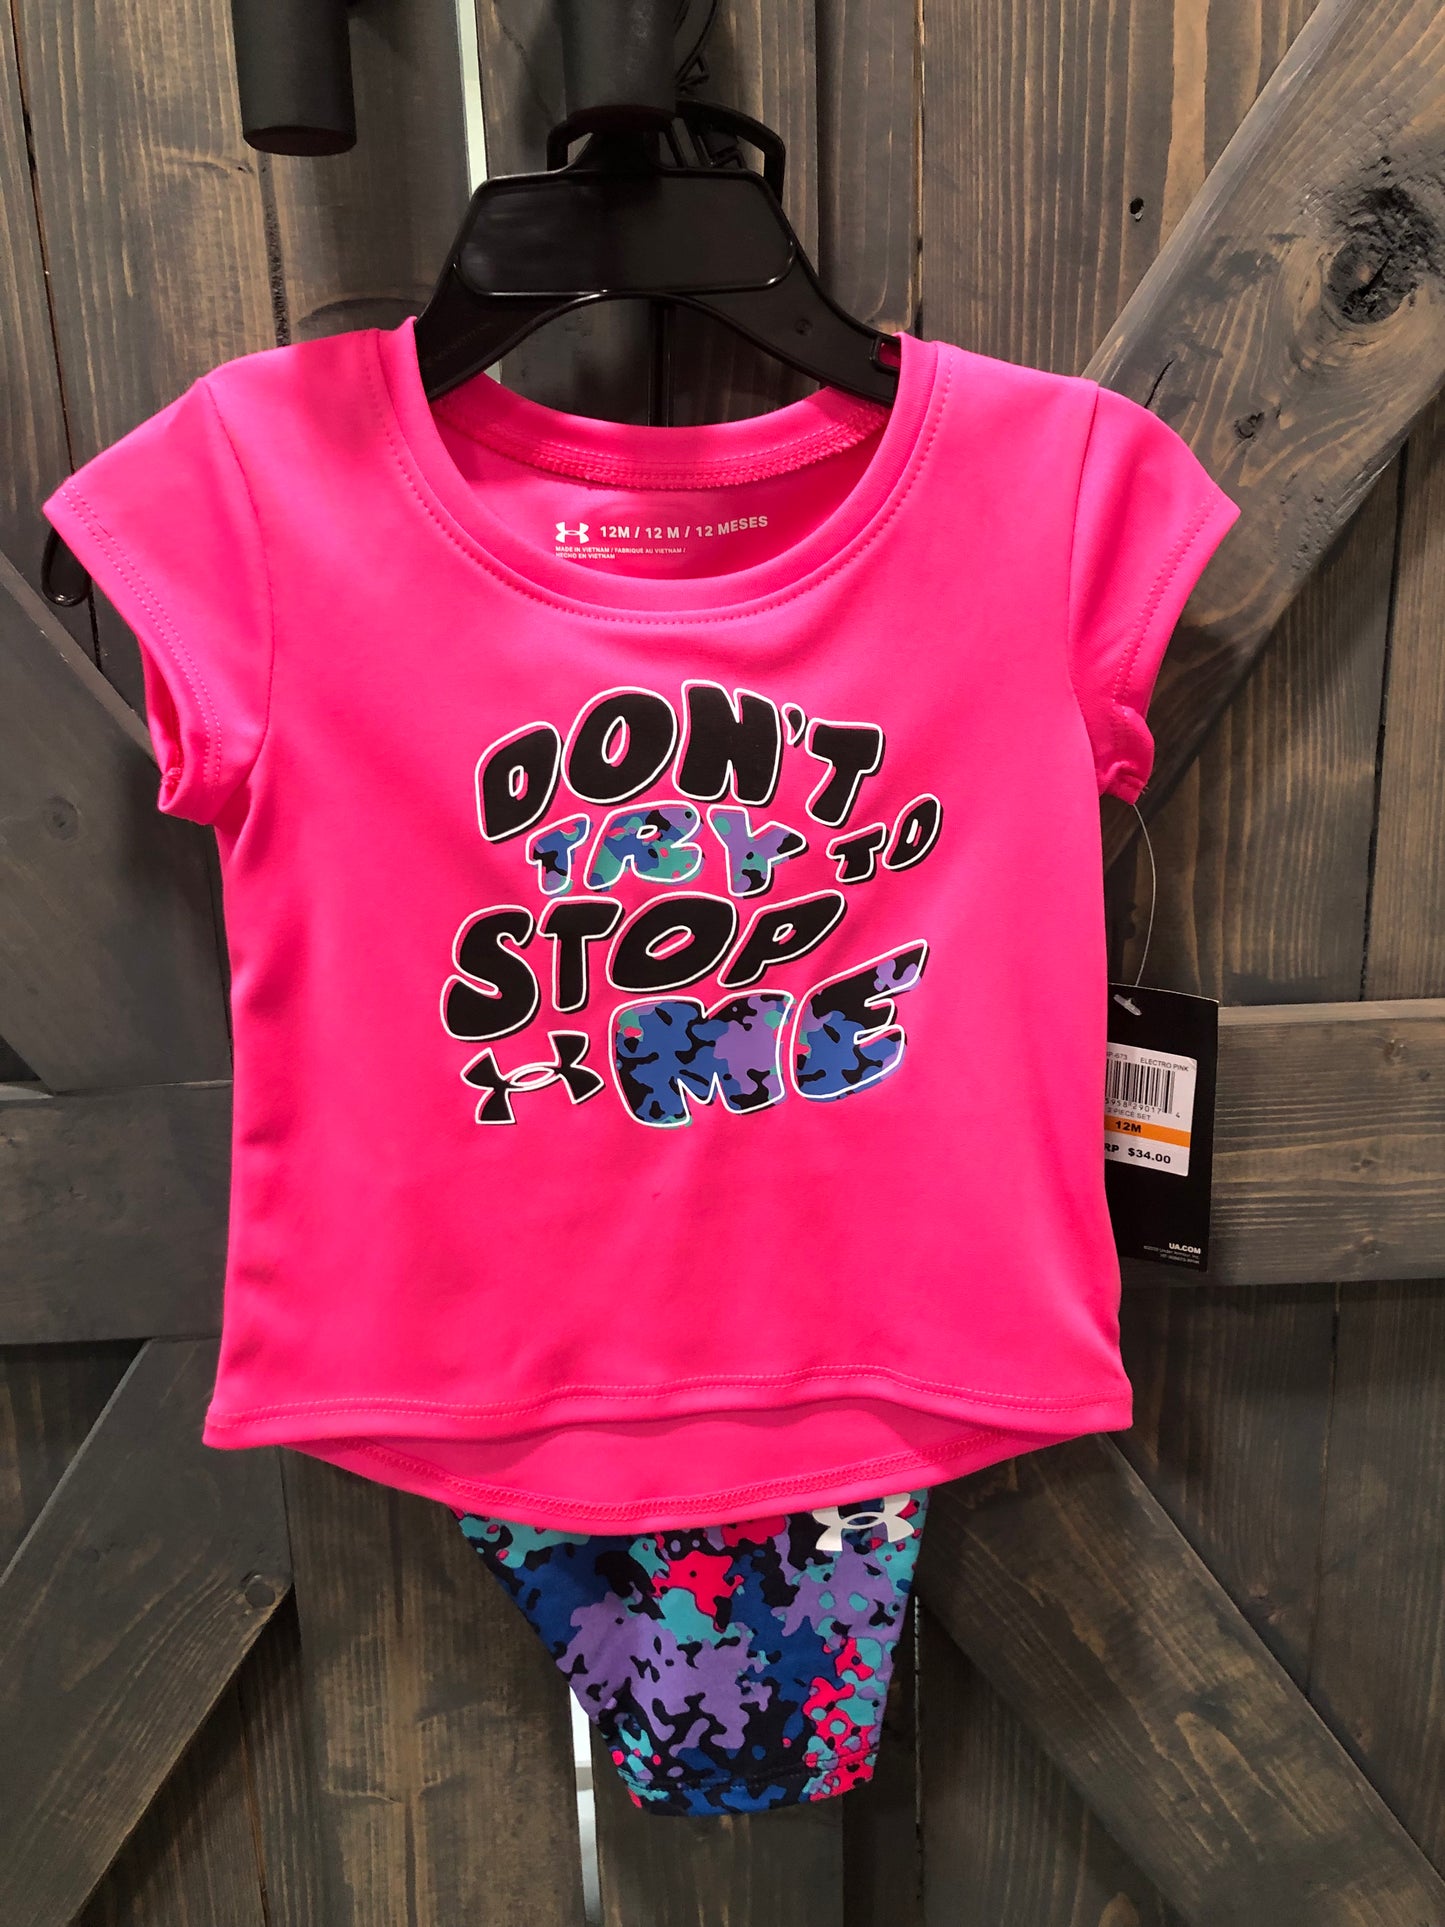 Under Amour “Don’t Try to Stop Me” Electro Pink Shorts Set